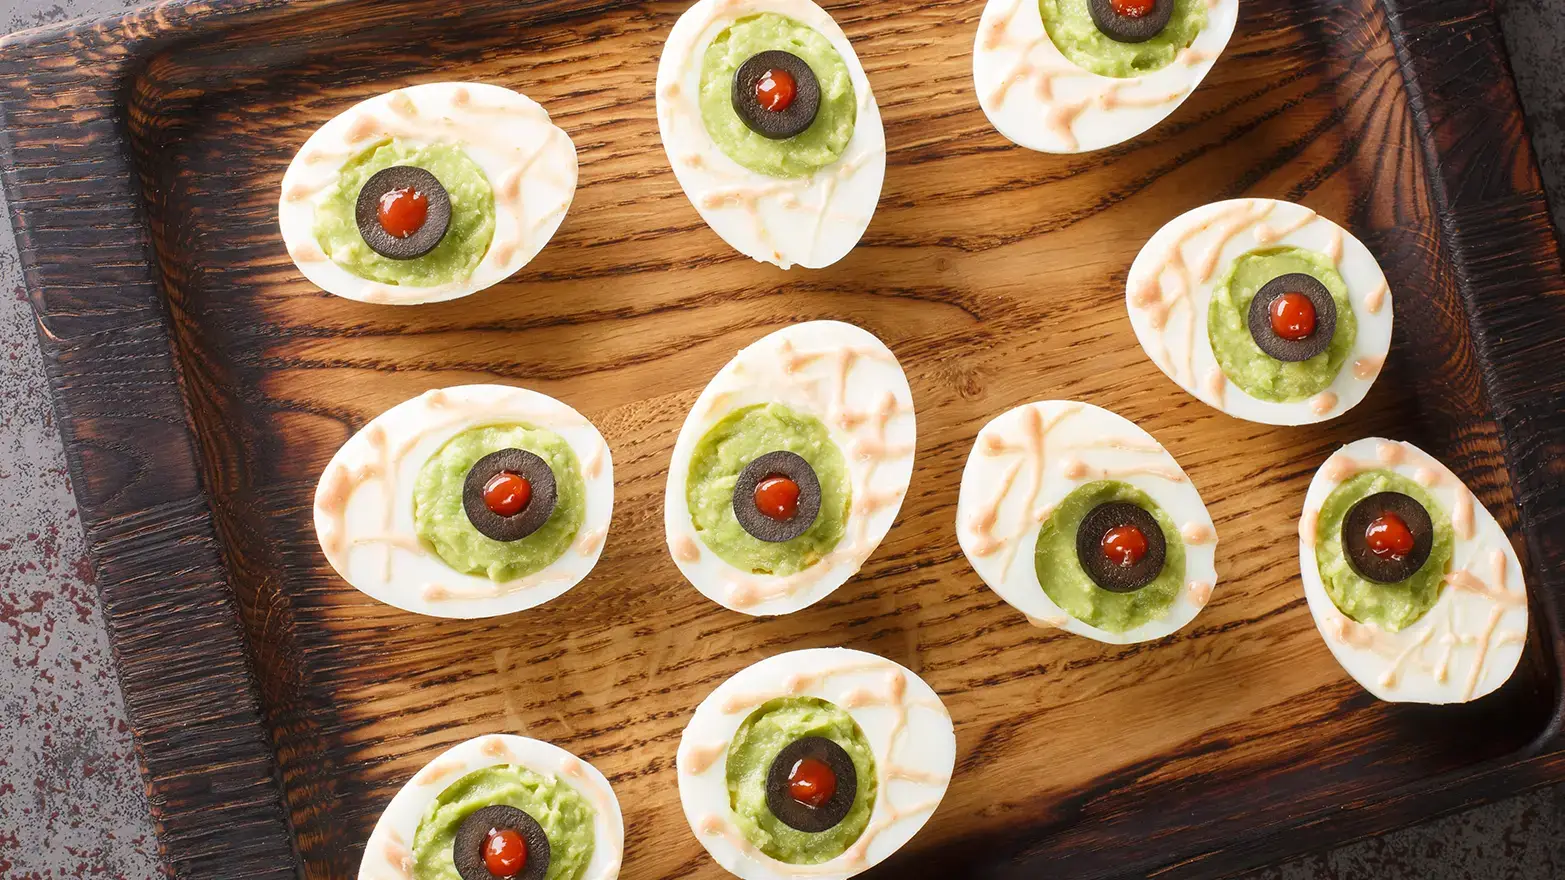 deviled eggs with green filling and stuffed olive eyes. 